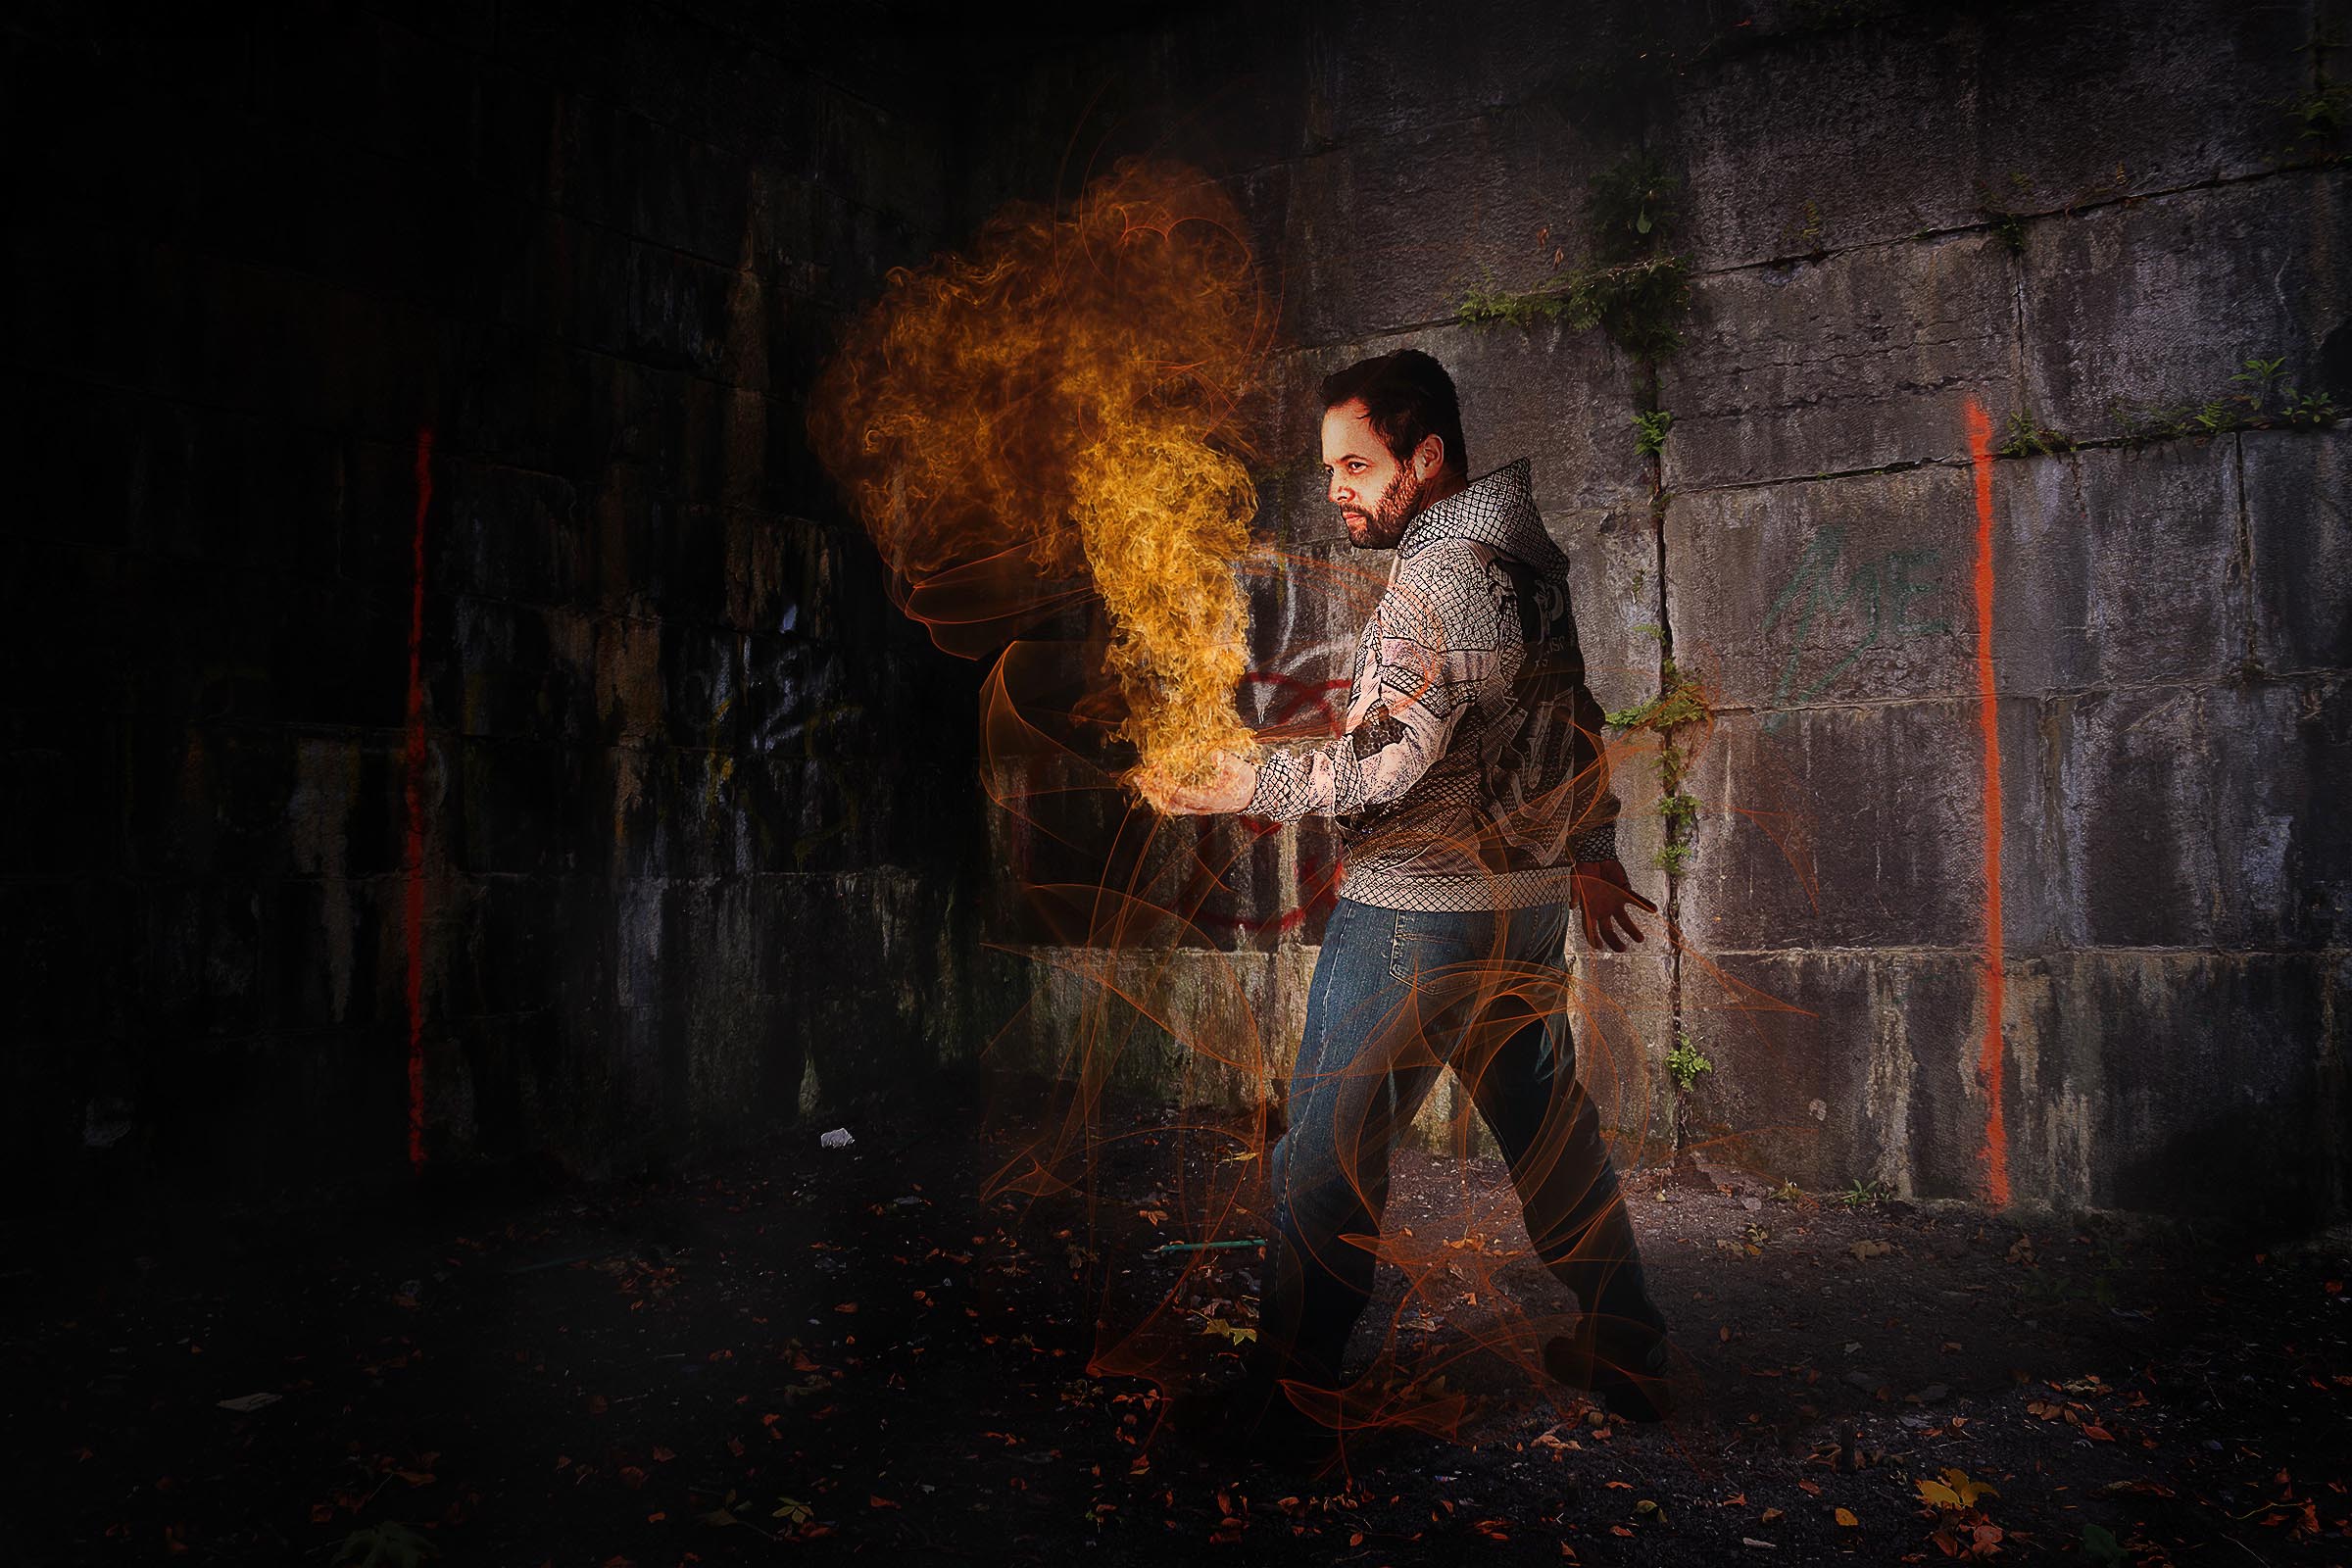 Composite of man standing with flame in hand night scene with stone wall background by Vaudreuil-Soulanges and West Island of Montreal photographer Tobi Malette